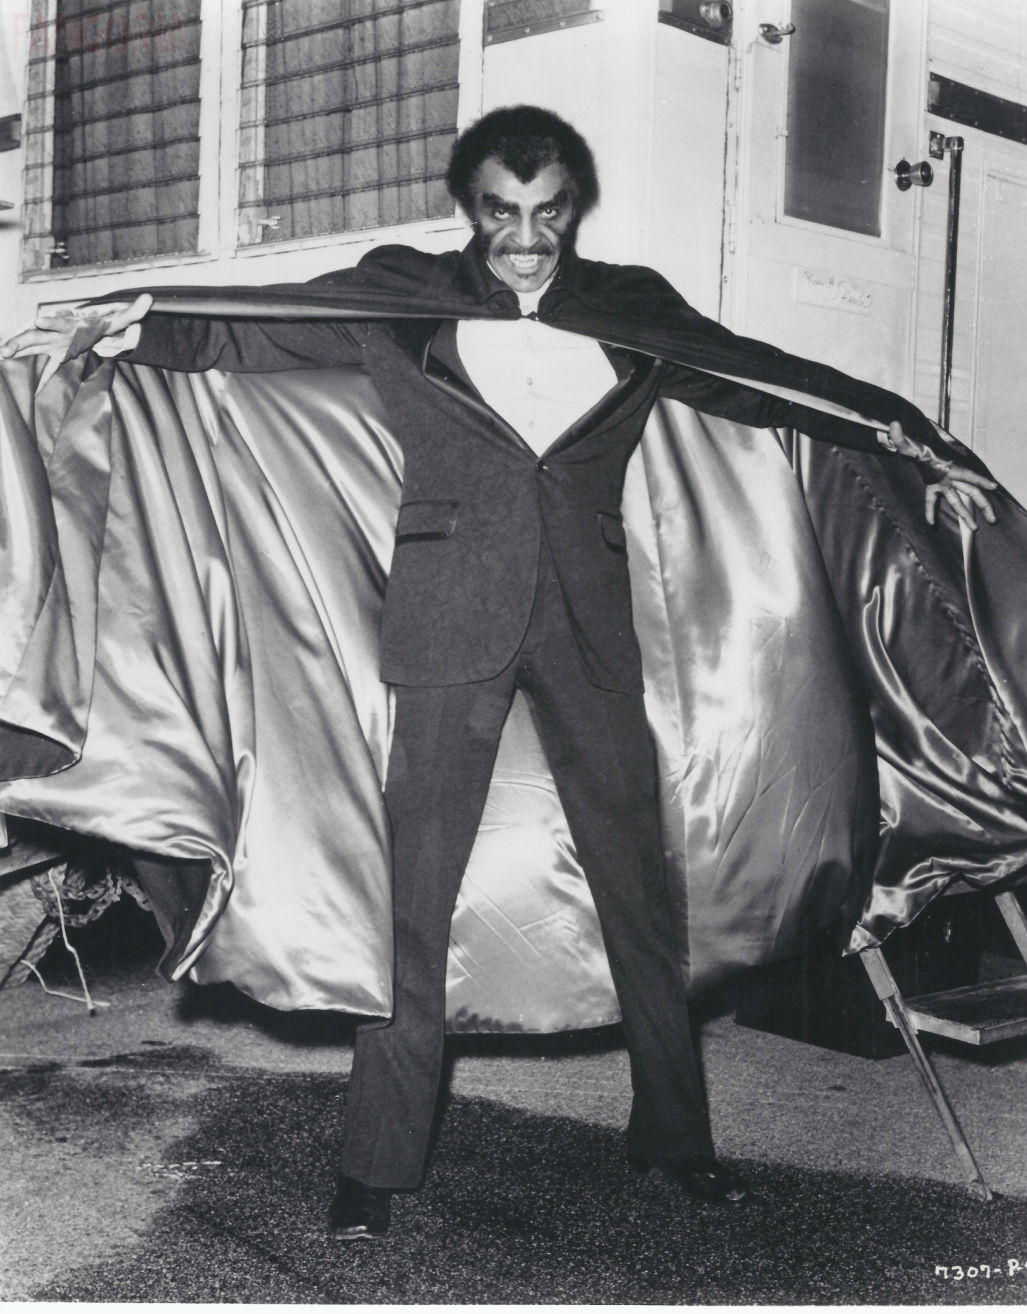 Blacula Backgrounds on Wallpapers Vista